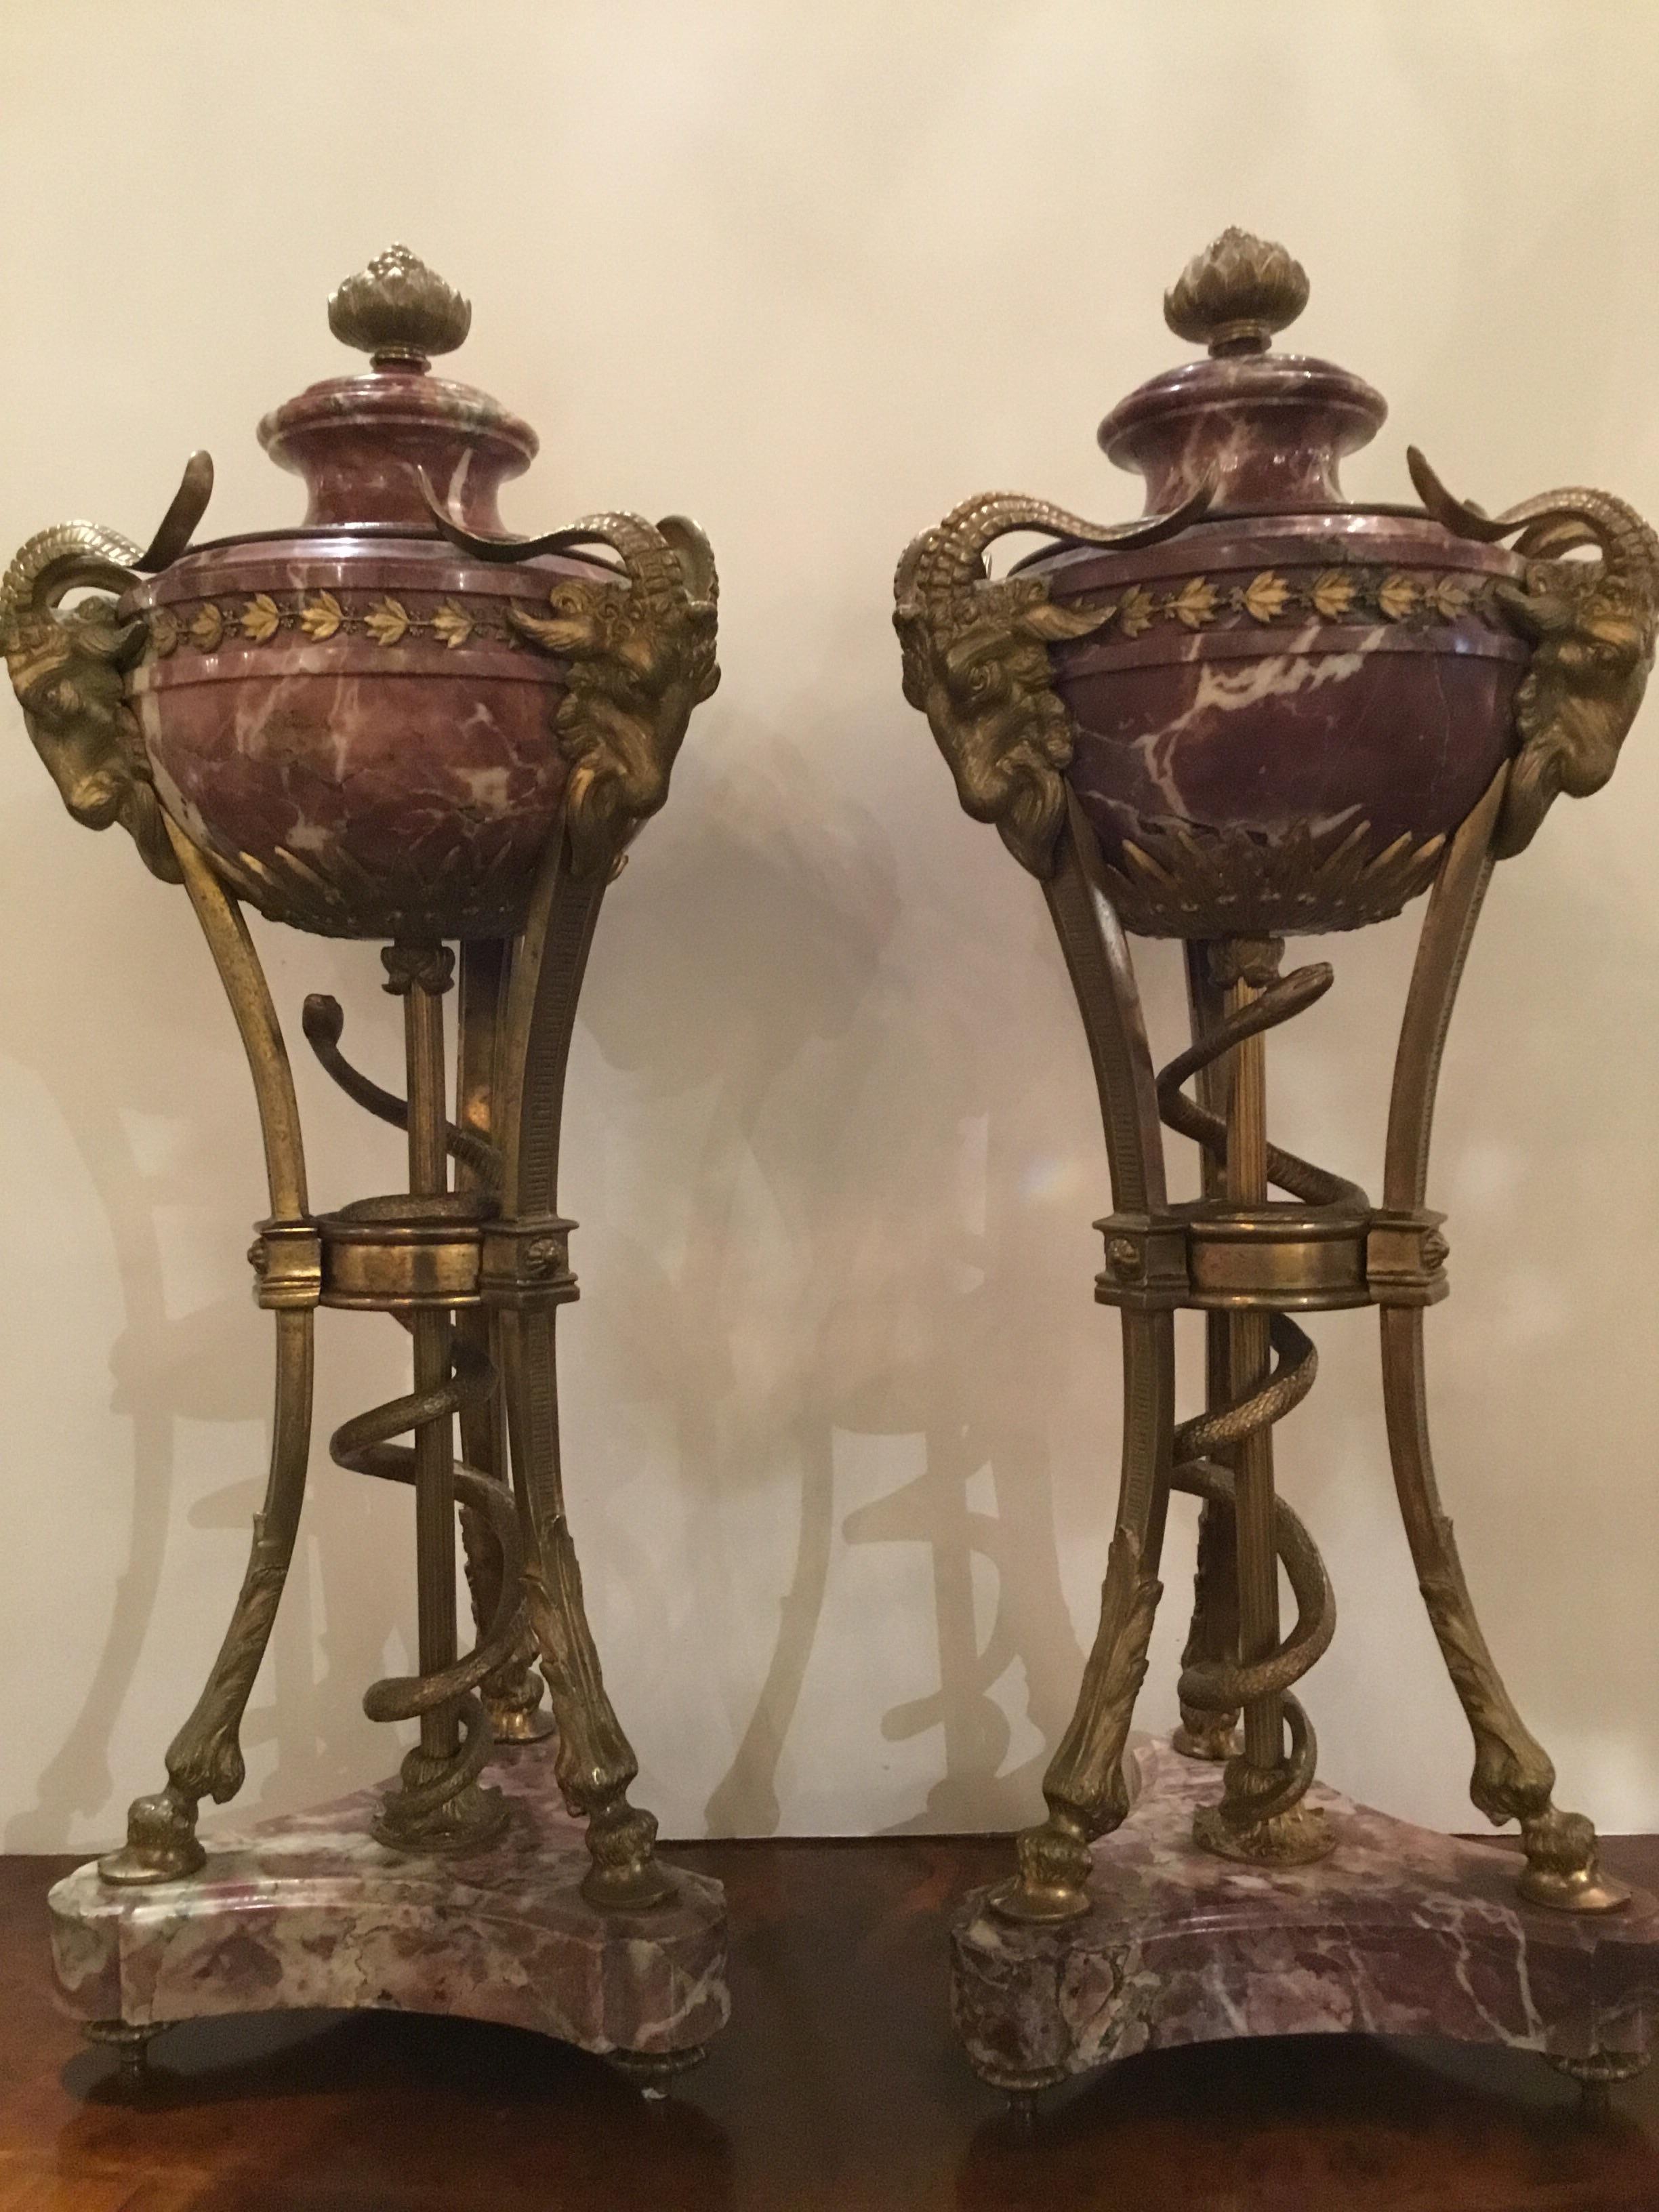 Impressive pair of gilt bronze and rouge marble cassolettes
19th century
Rams heads